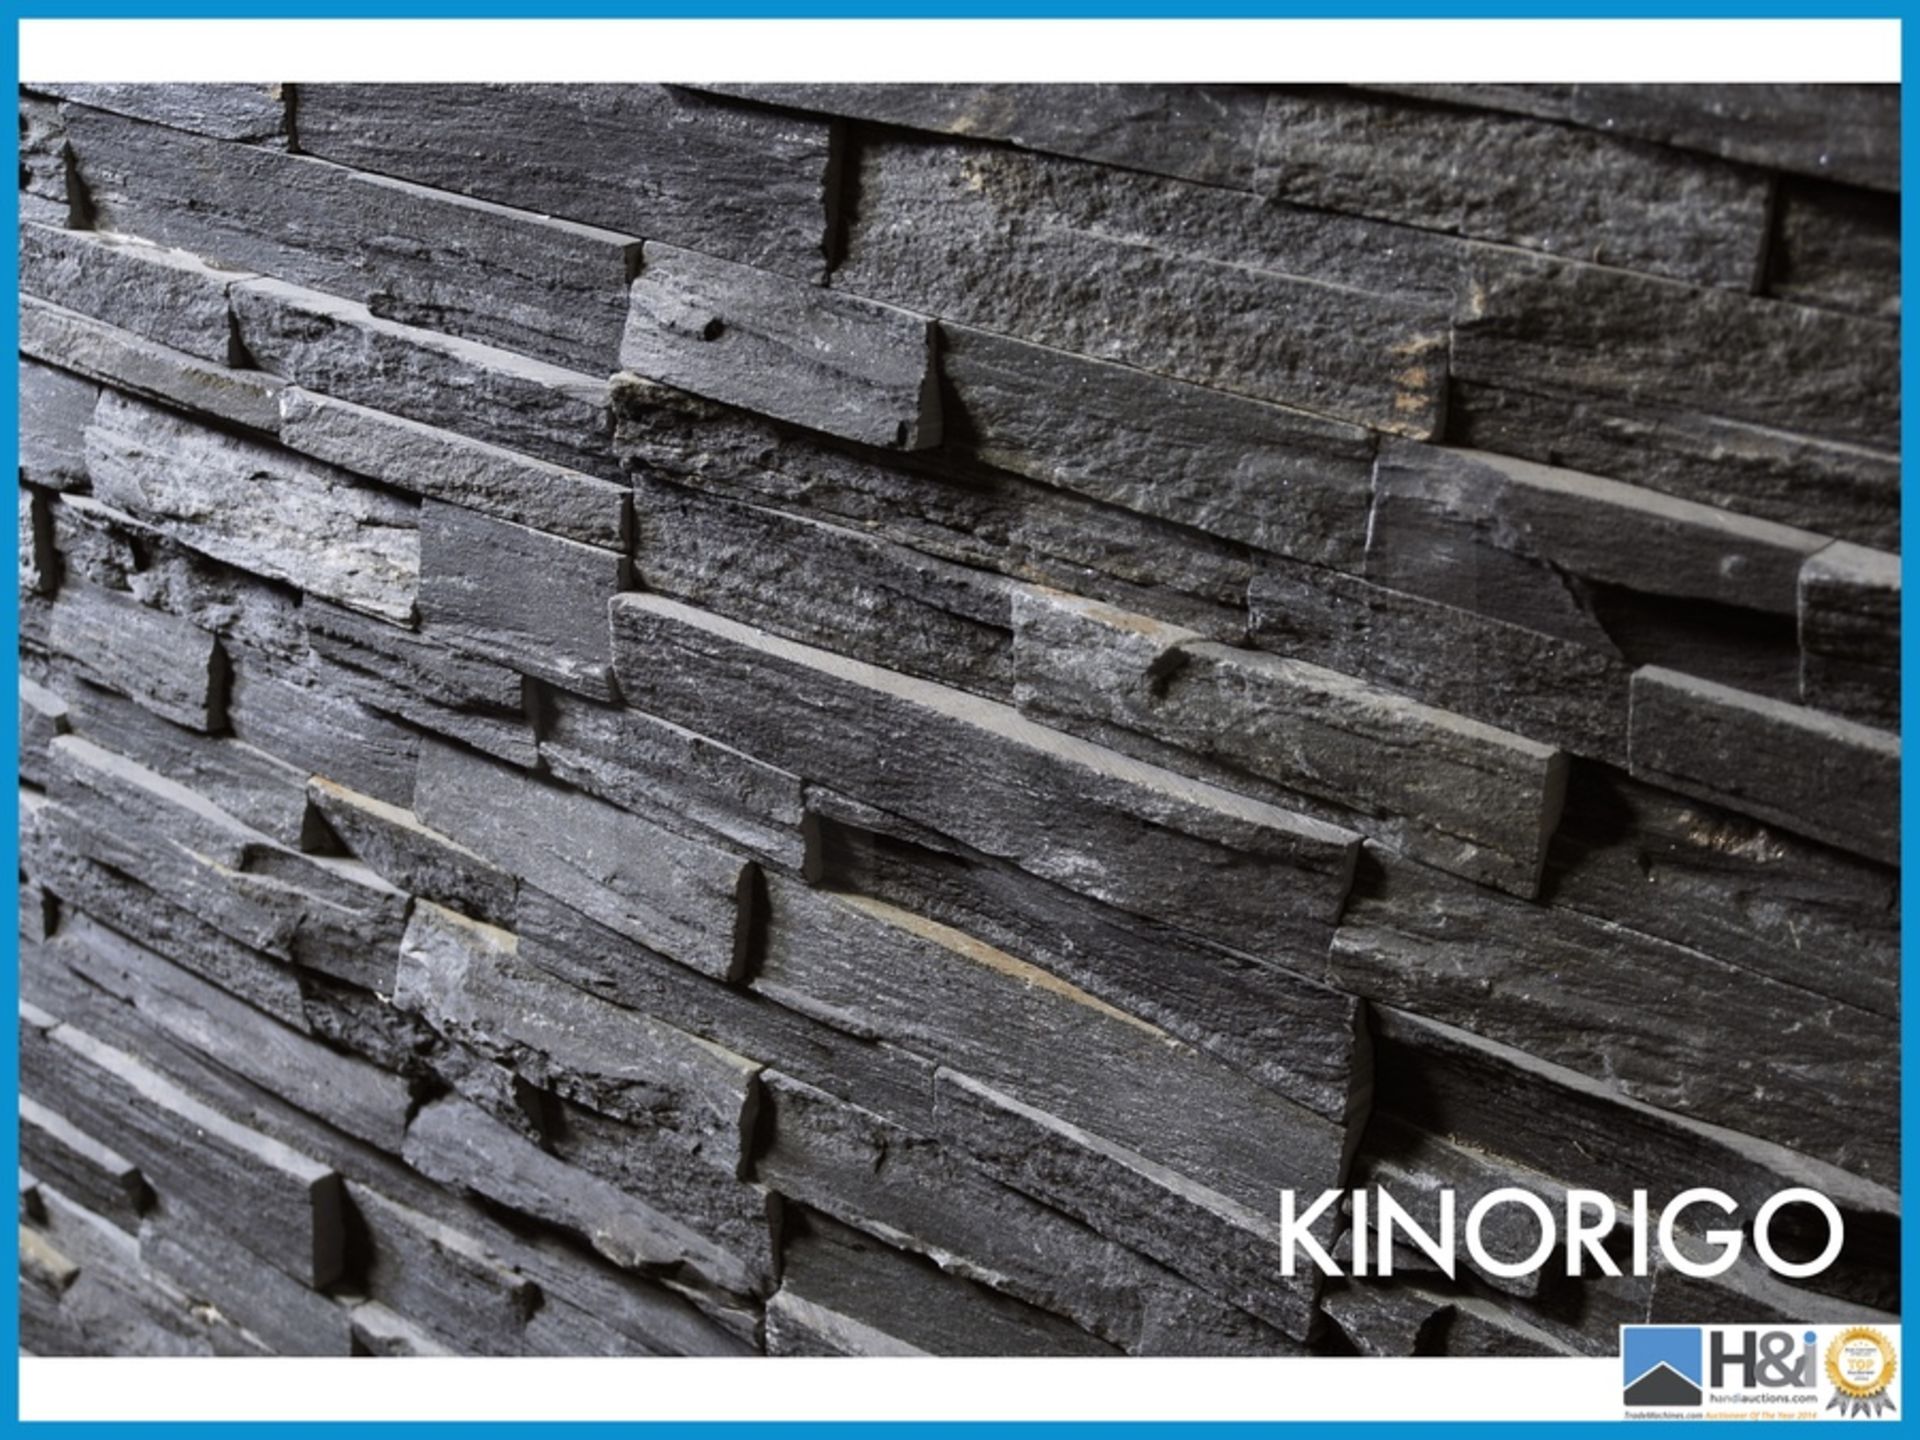 Absolutely stunning Kinorigo Picante Midnight. Material: Slate. No. of crates per lot: 1. Qty per